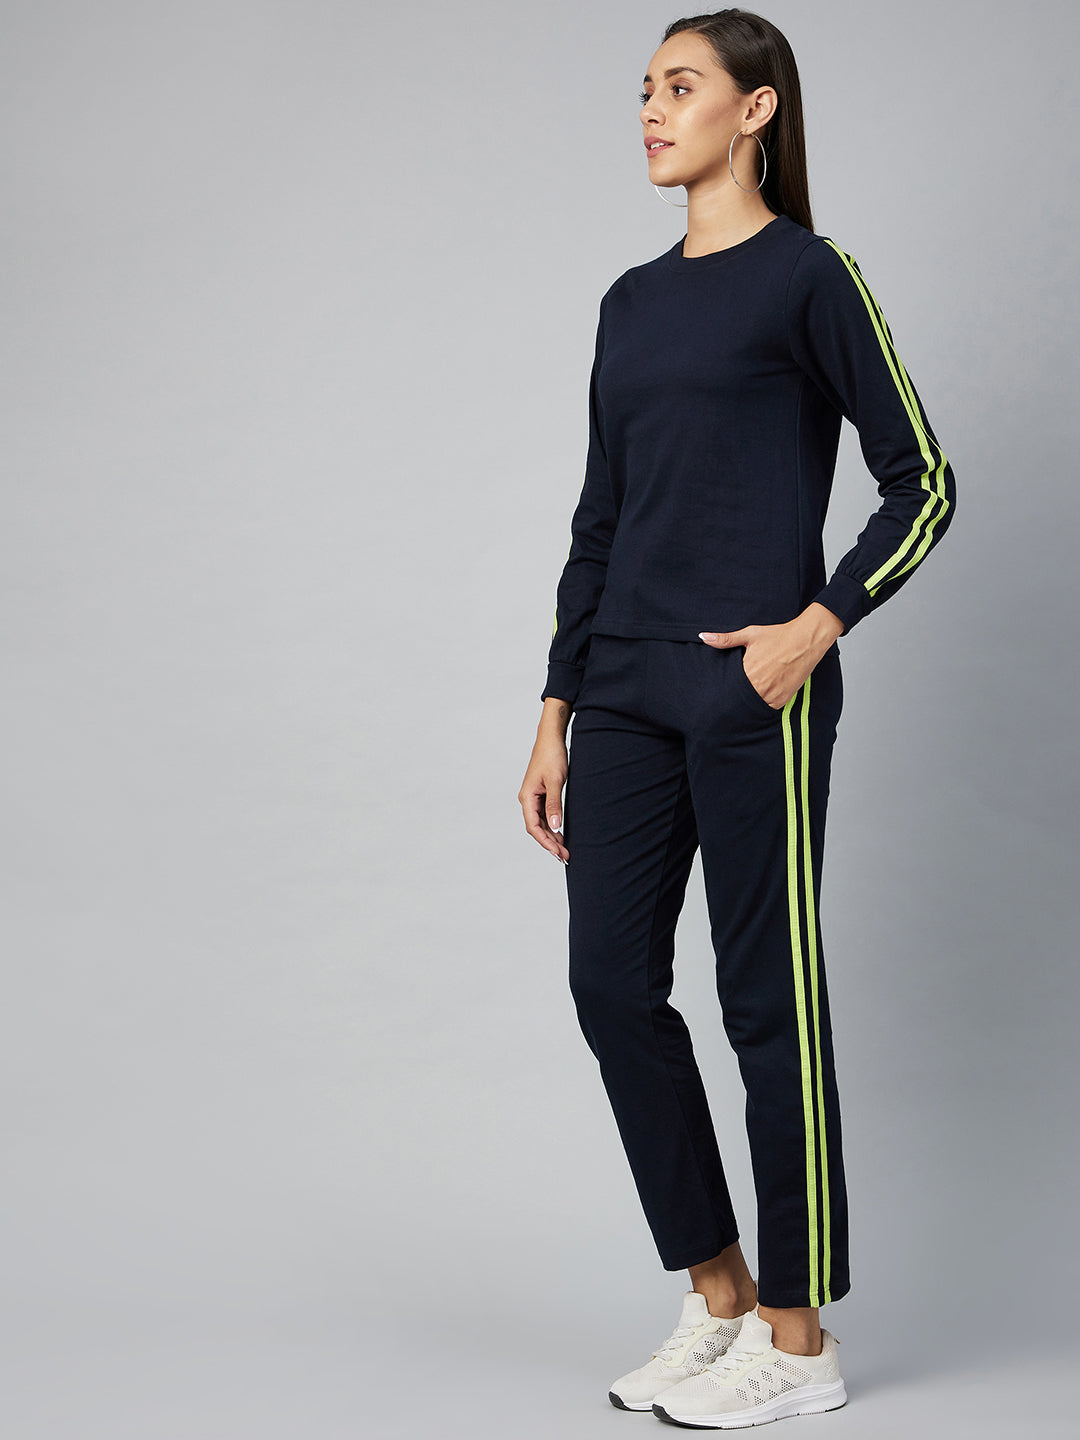 Women's Cotton Navy Blue Track Suit Set with Lime Green Stripe